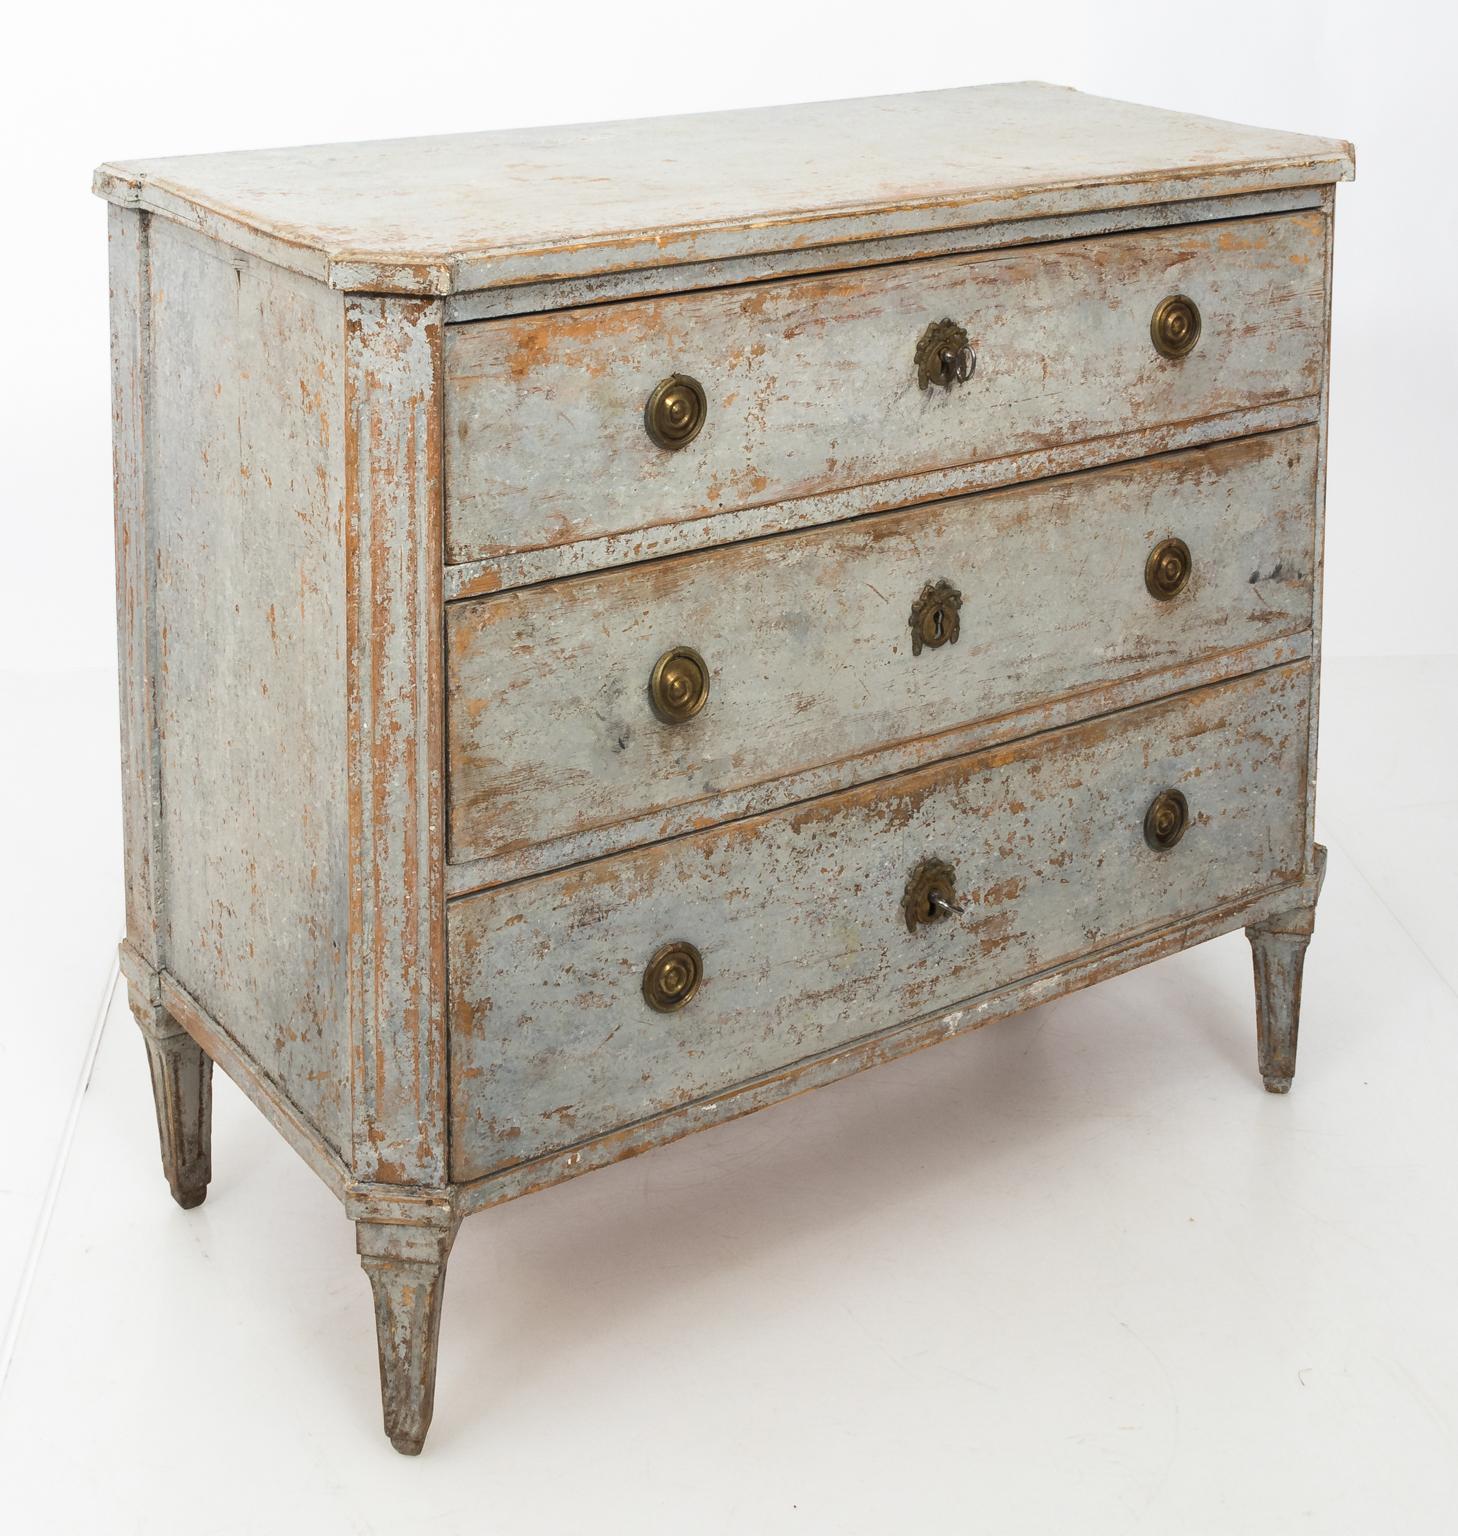 Blue painted Gustavian chest of drawers with classical elements of the period such as floral brass escutcheon and turned legs, circa 1790. The historic blue paint shows some restoration and has original patina.
              